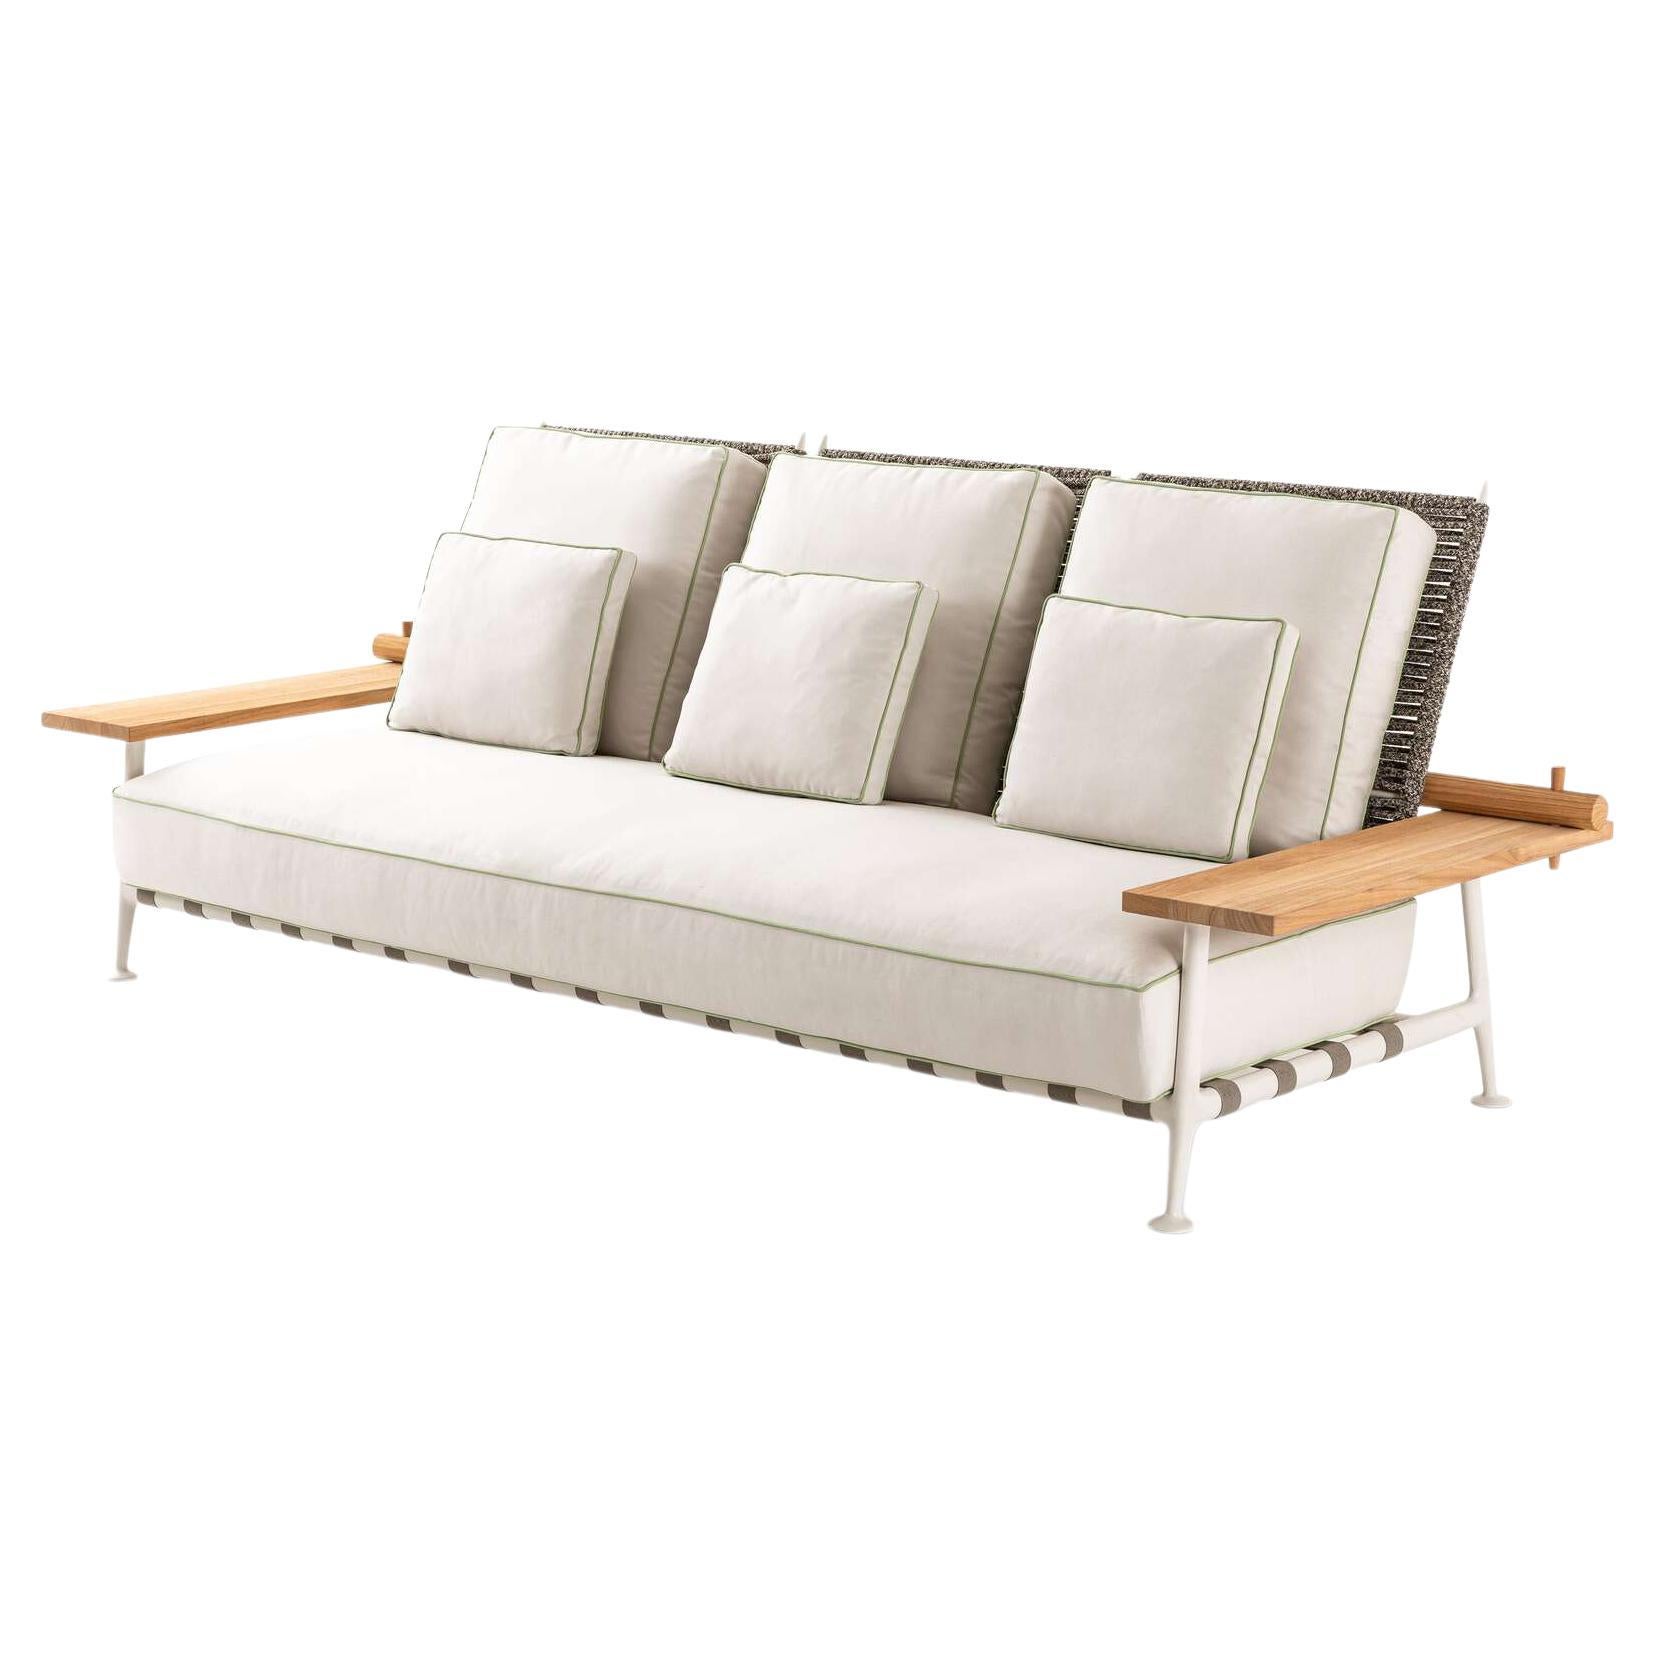 The price given applies to the sofa as shown in the first picture. Prices vary dependent on the size/model and material of the sofa.

Outdoor Sofa designed by Philippe Starck in 2020. Manufactured by Cassina in Italy. Defined by Philippe Starck as